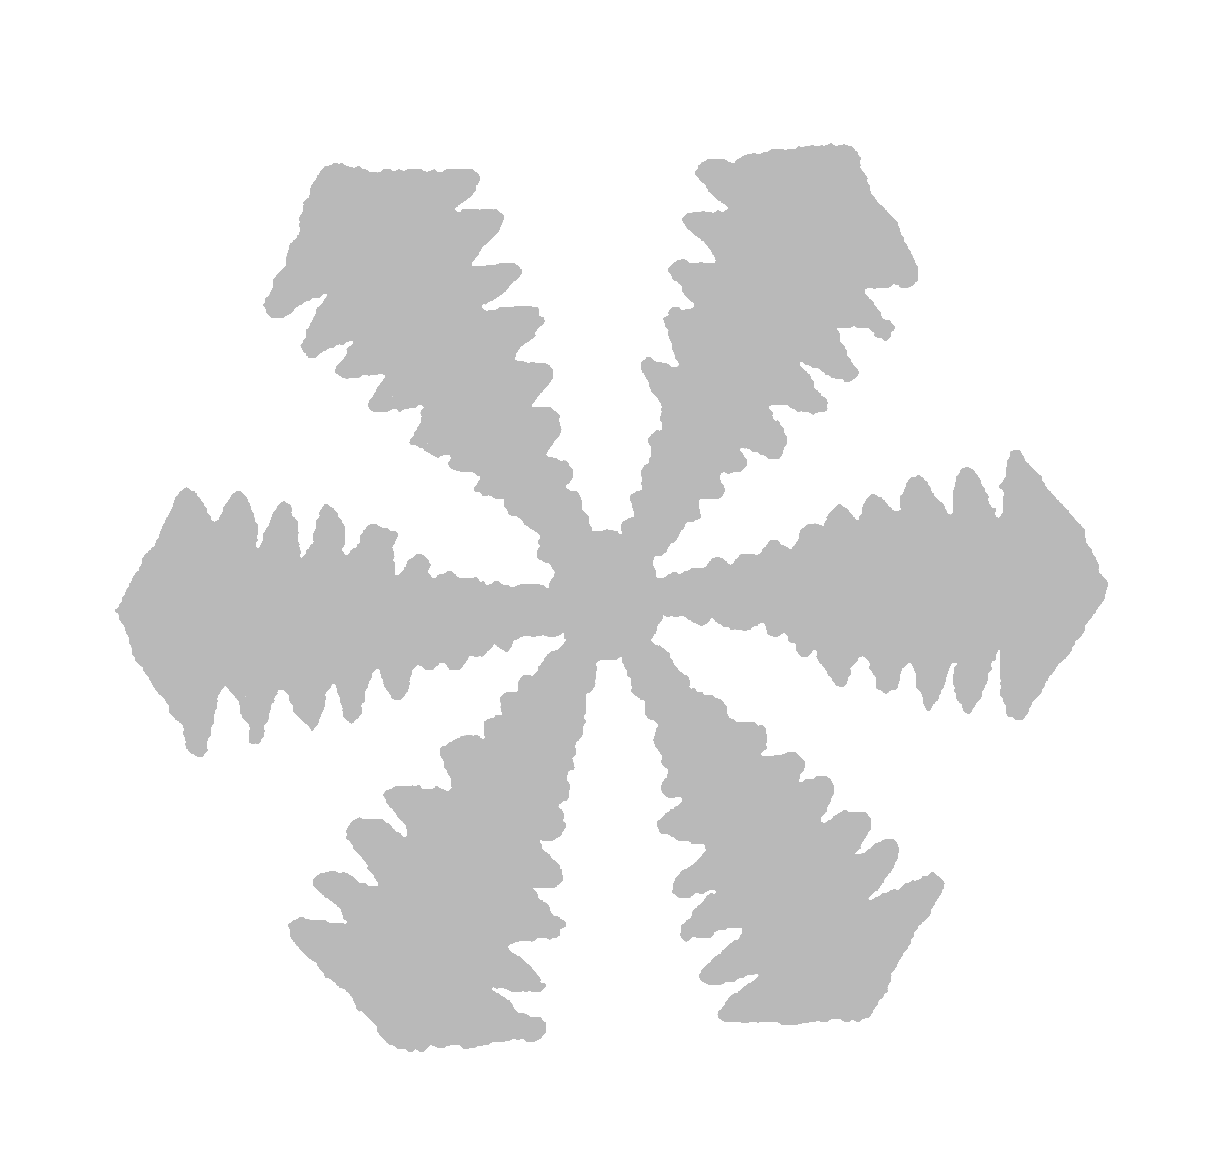 The Graphics Monarch: Digital Snowflake Silhouette Downloads Grayscale Christmas Clip Art1224 x 1174